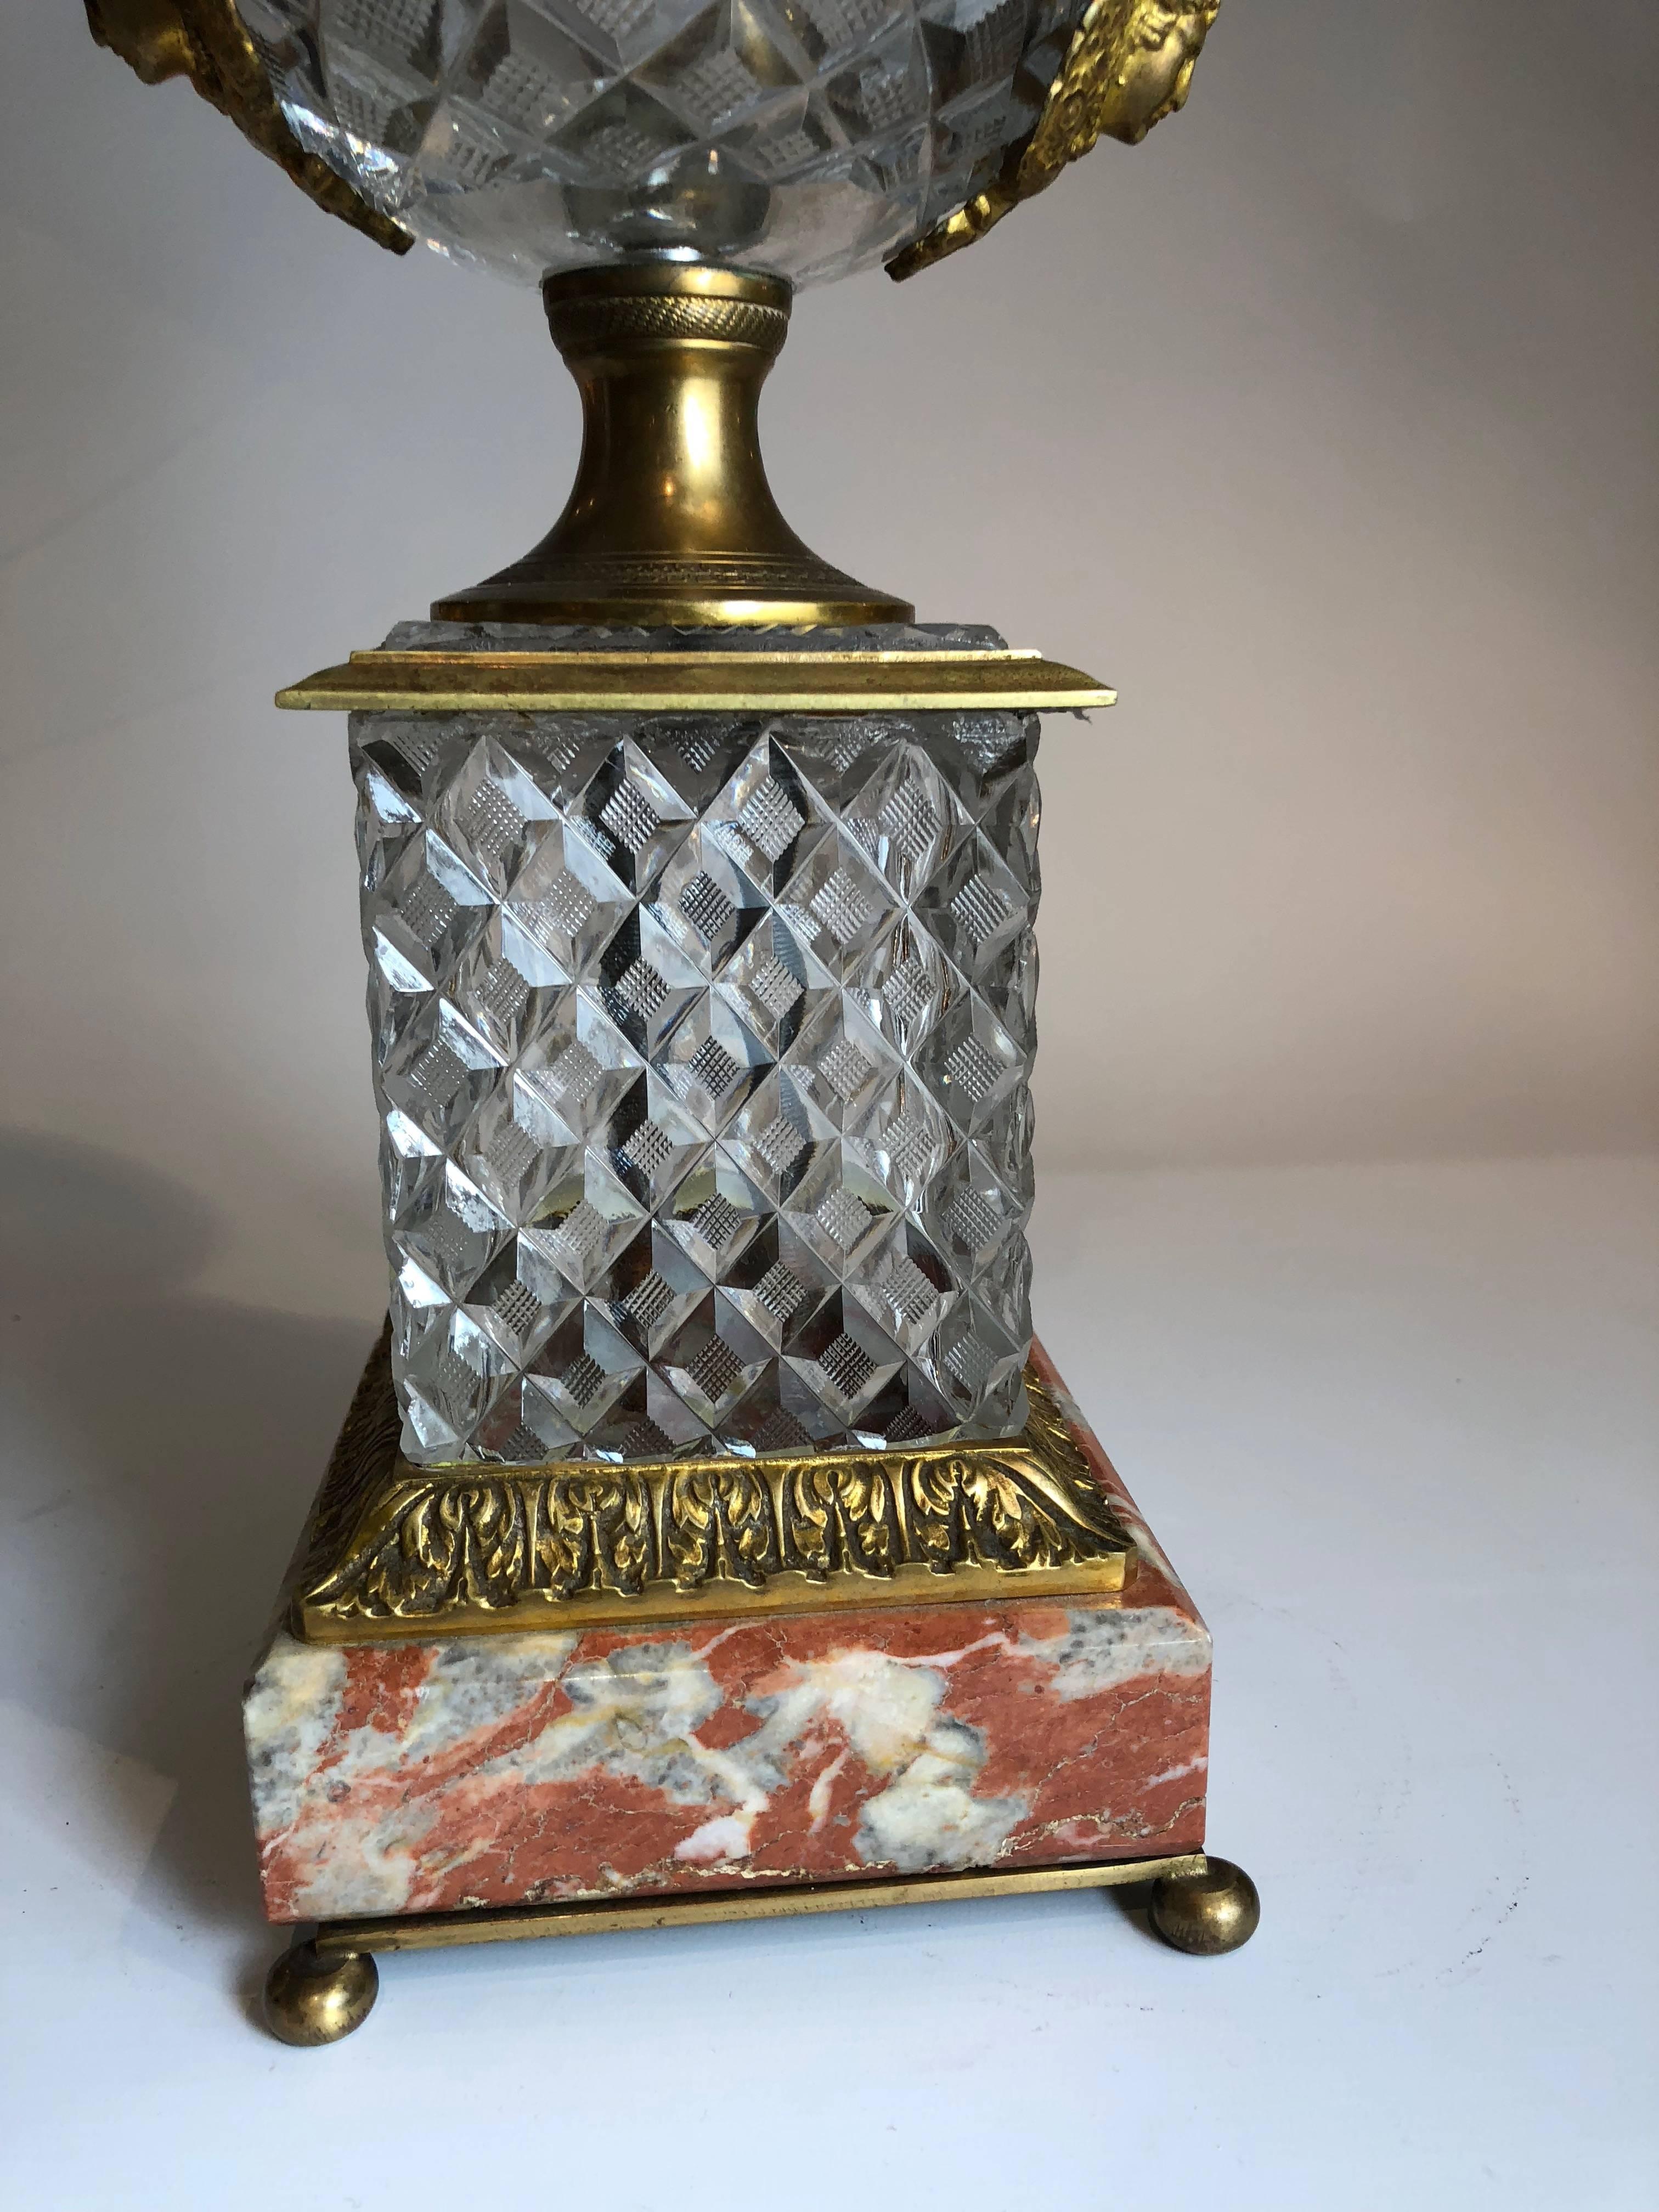 French campana shaped urn, with a reuge marble base,

circa 1890

Measures: 17